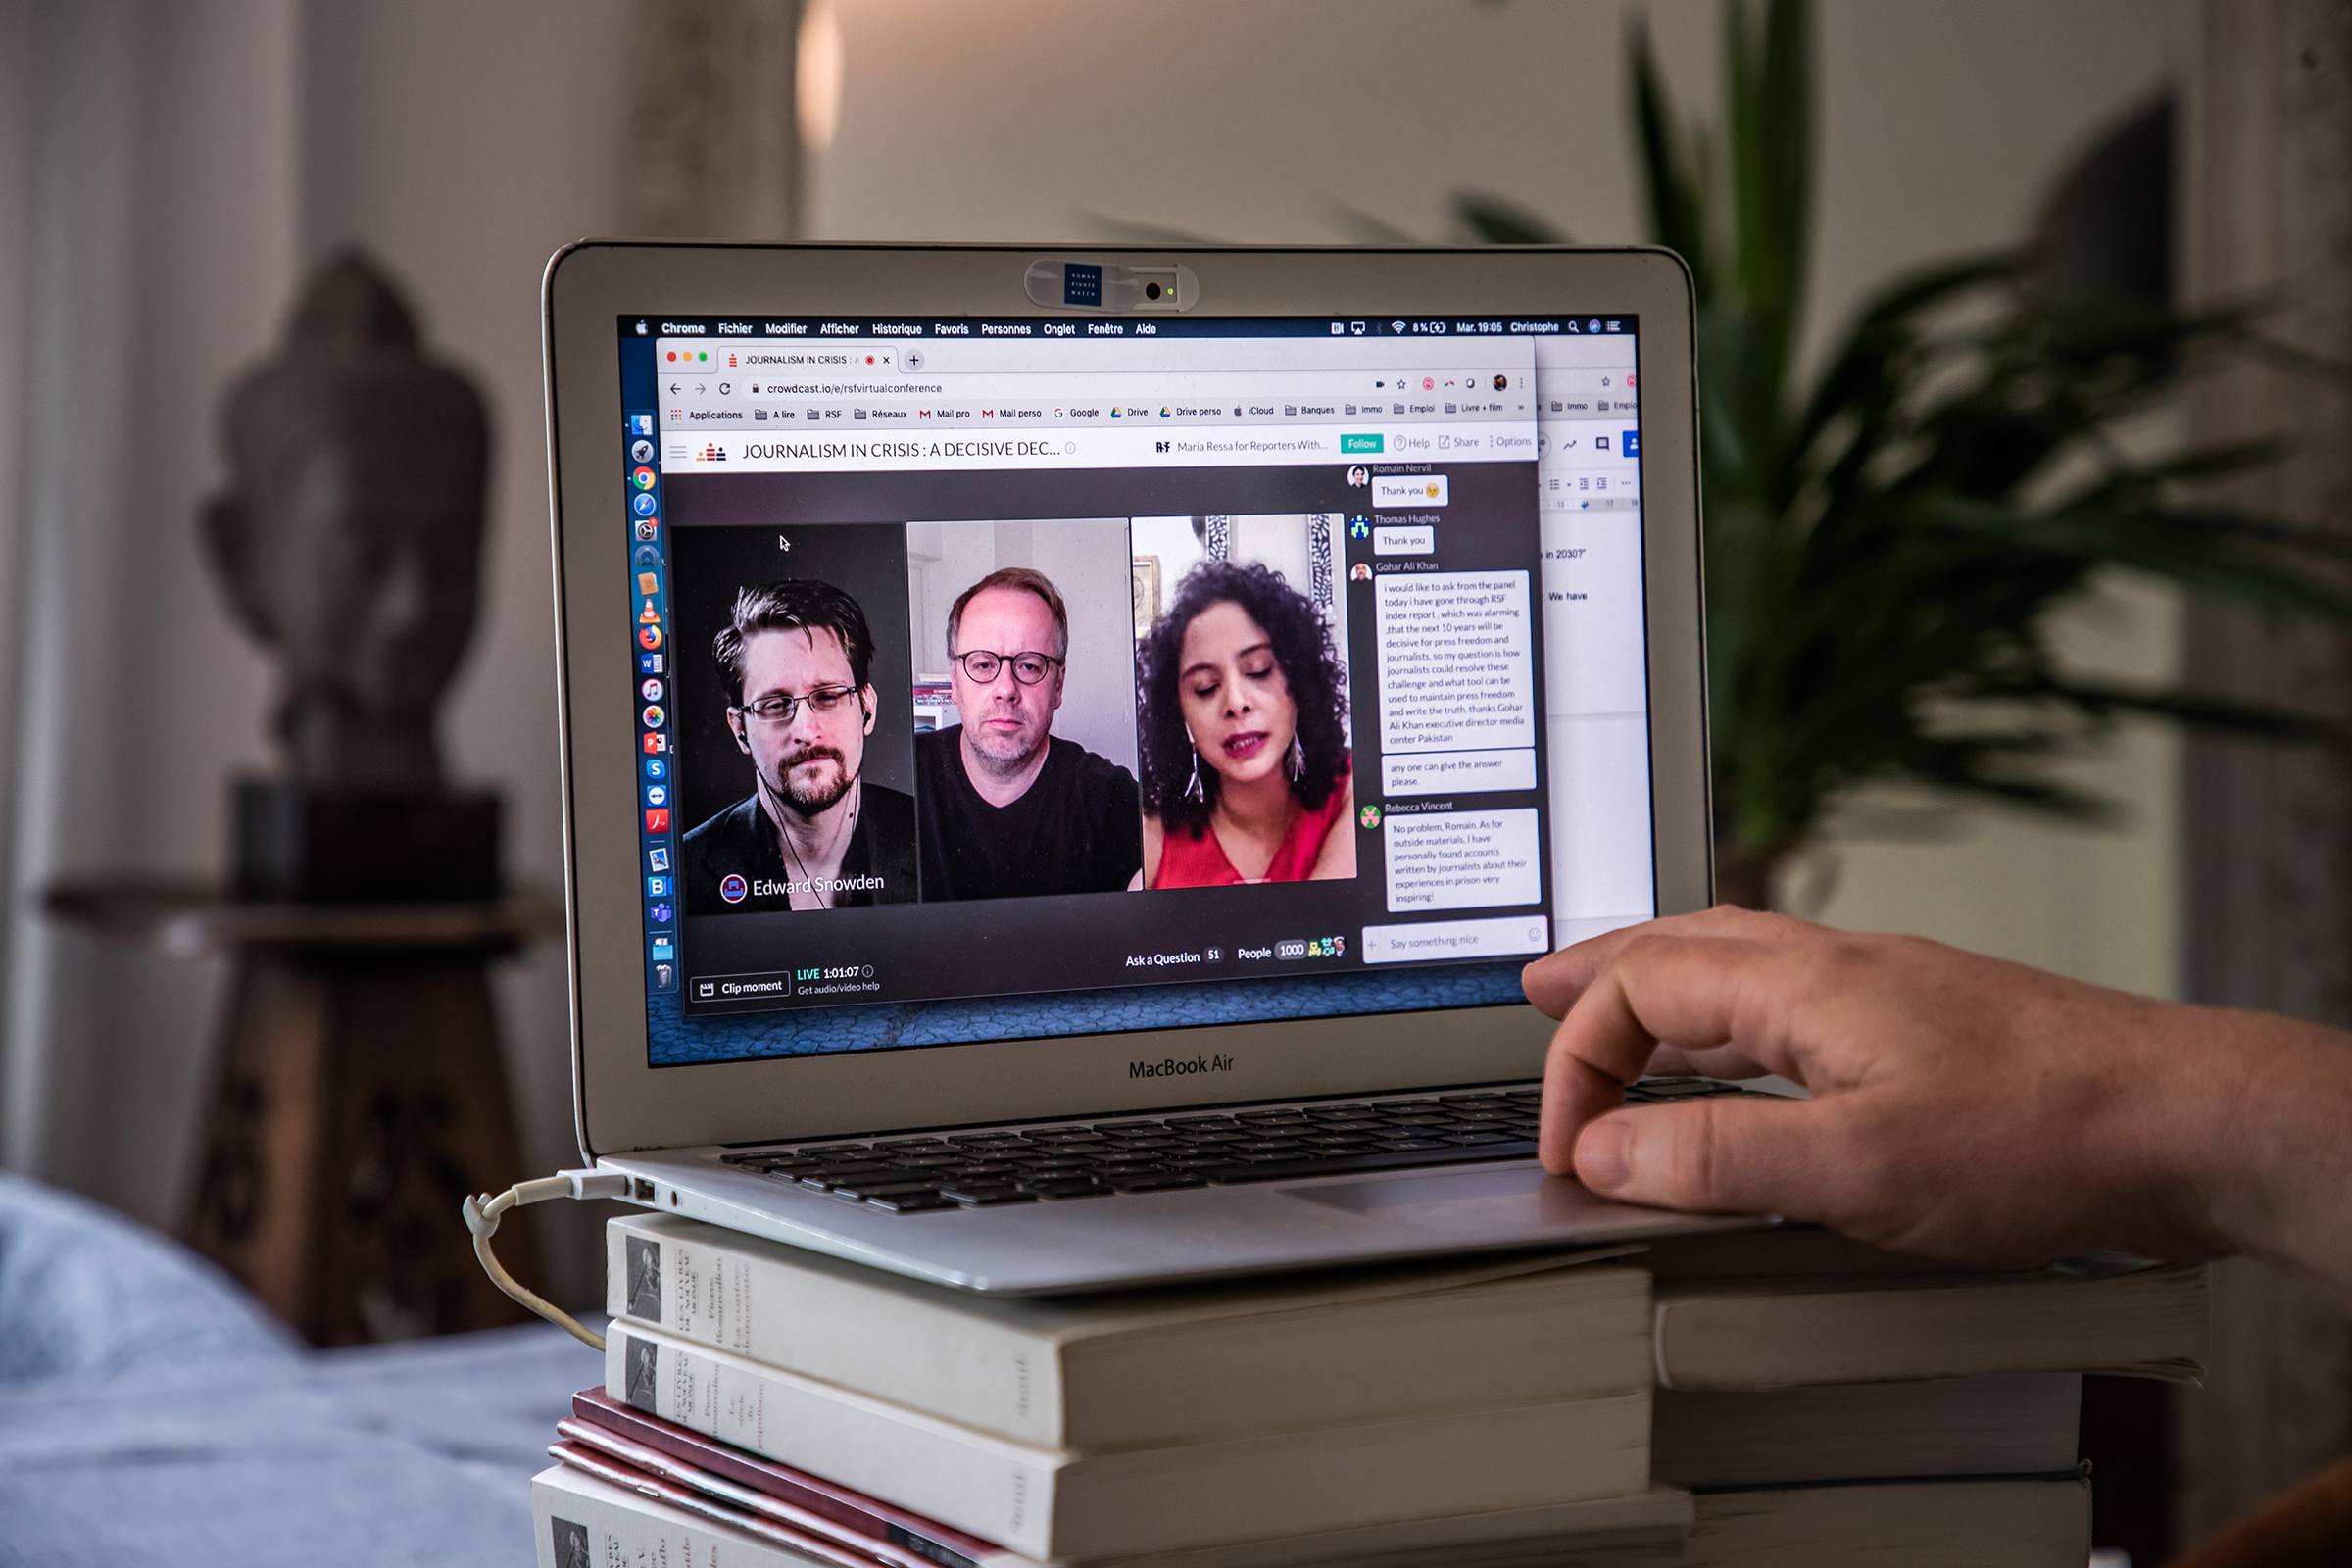 Christophe Deloire (R), Secretary General of Reporter Without Borders, attends a video conference call with Edward Snowden (L on the screen) and Rana Ayyub (R on the screen) during the launch of the 2020 Press Freedom Index in Paris in April 2020. (Christophe Petit Tesson—EPA-EFE/Shutterstock)